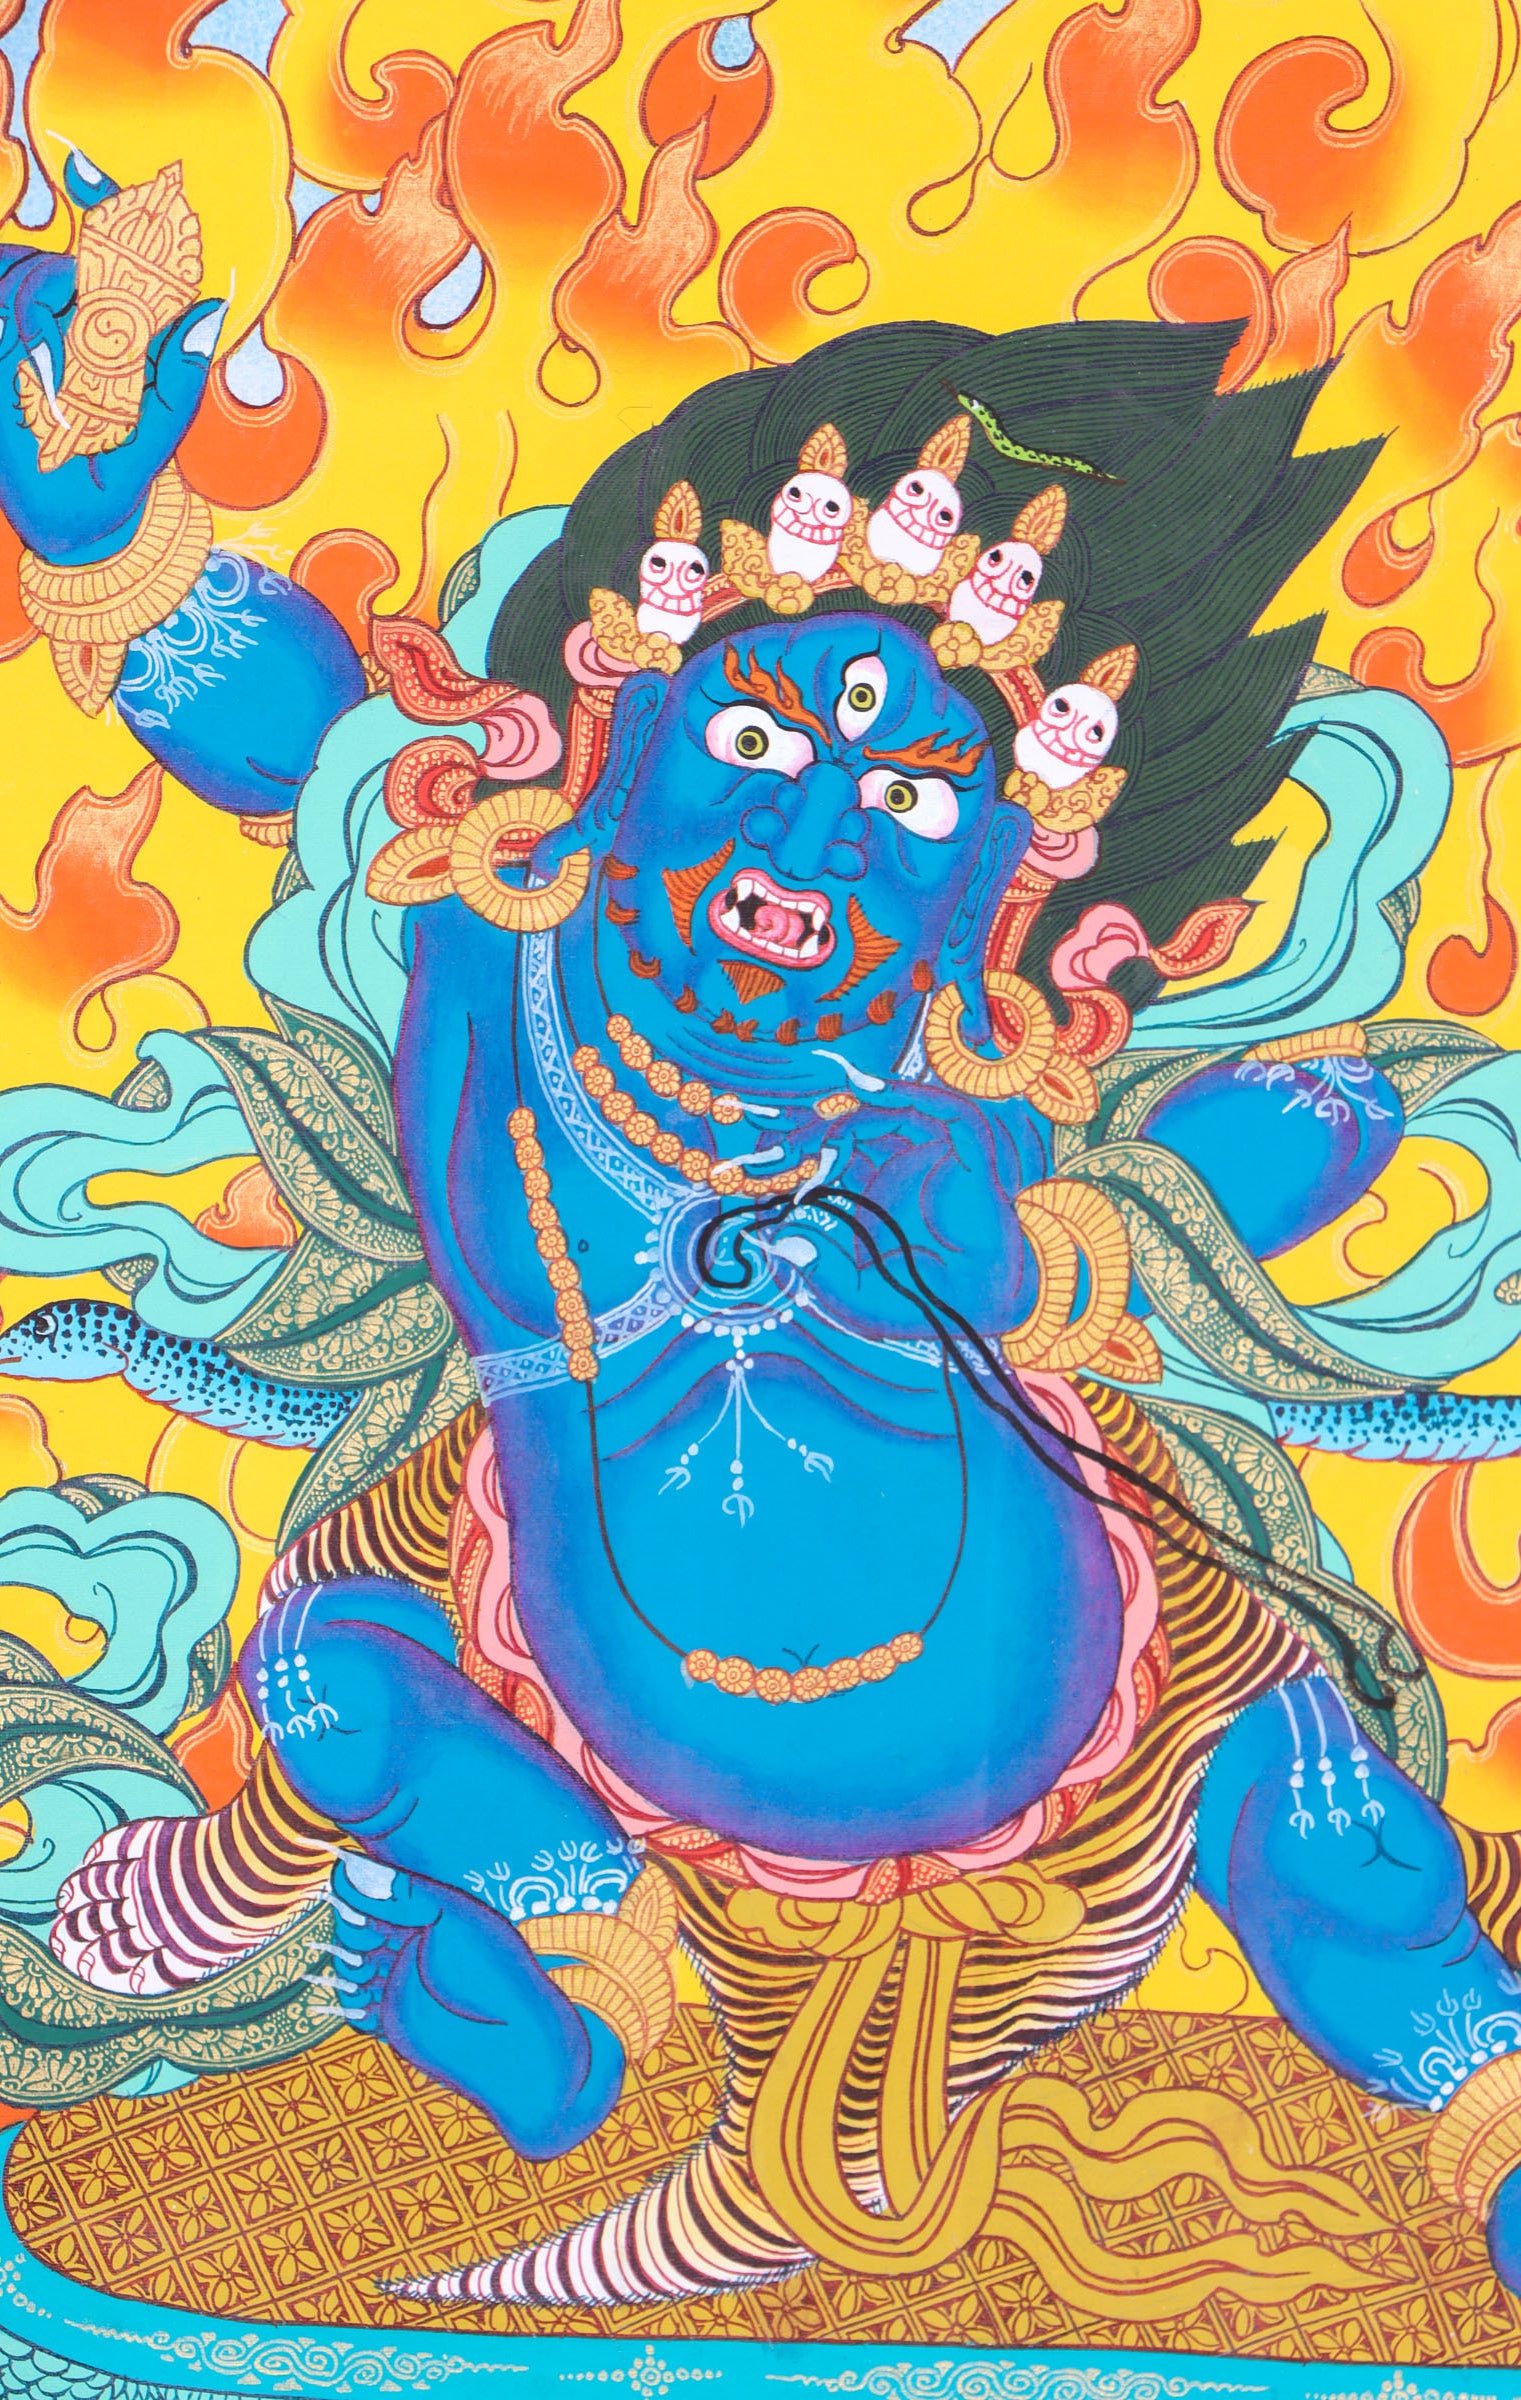 Vajrapani Thangka for transformative power of wisdom and compassion.